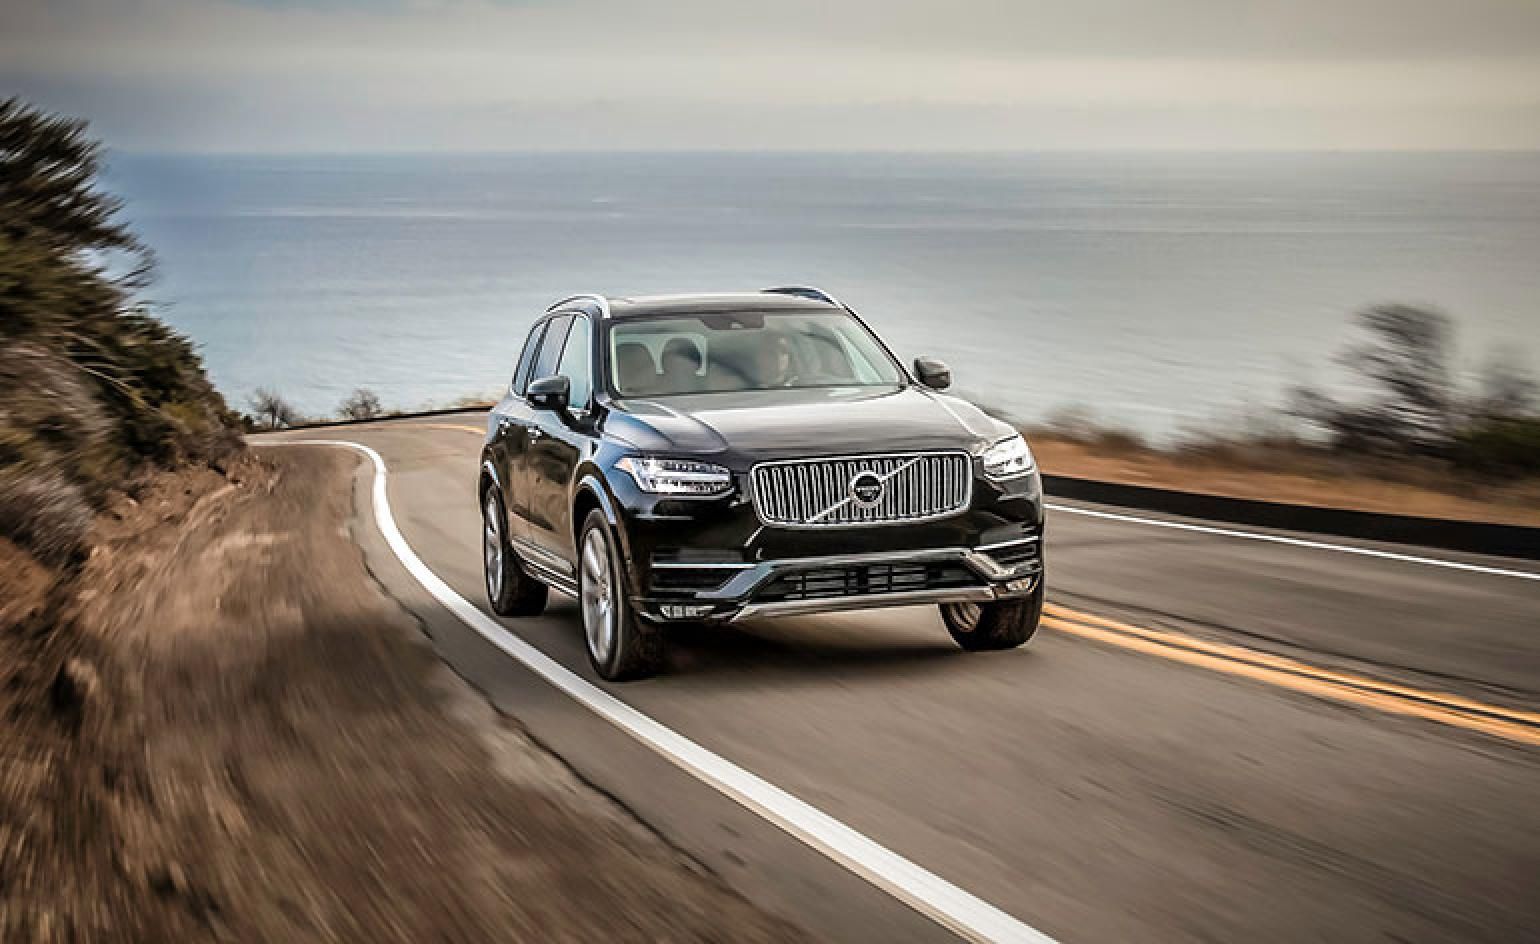 Volvo's new XC90 marks an apex in company tradition. Wallpaper*